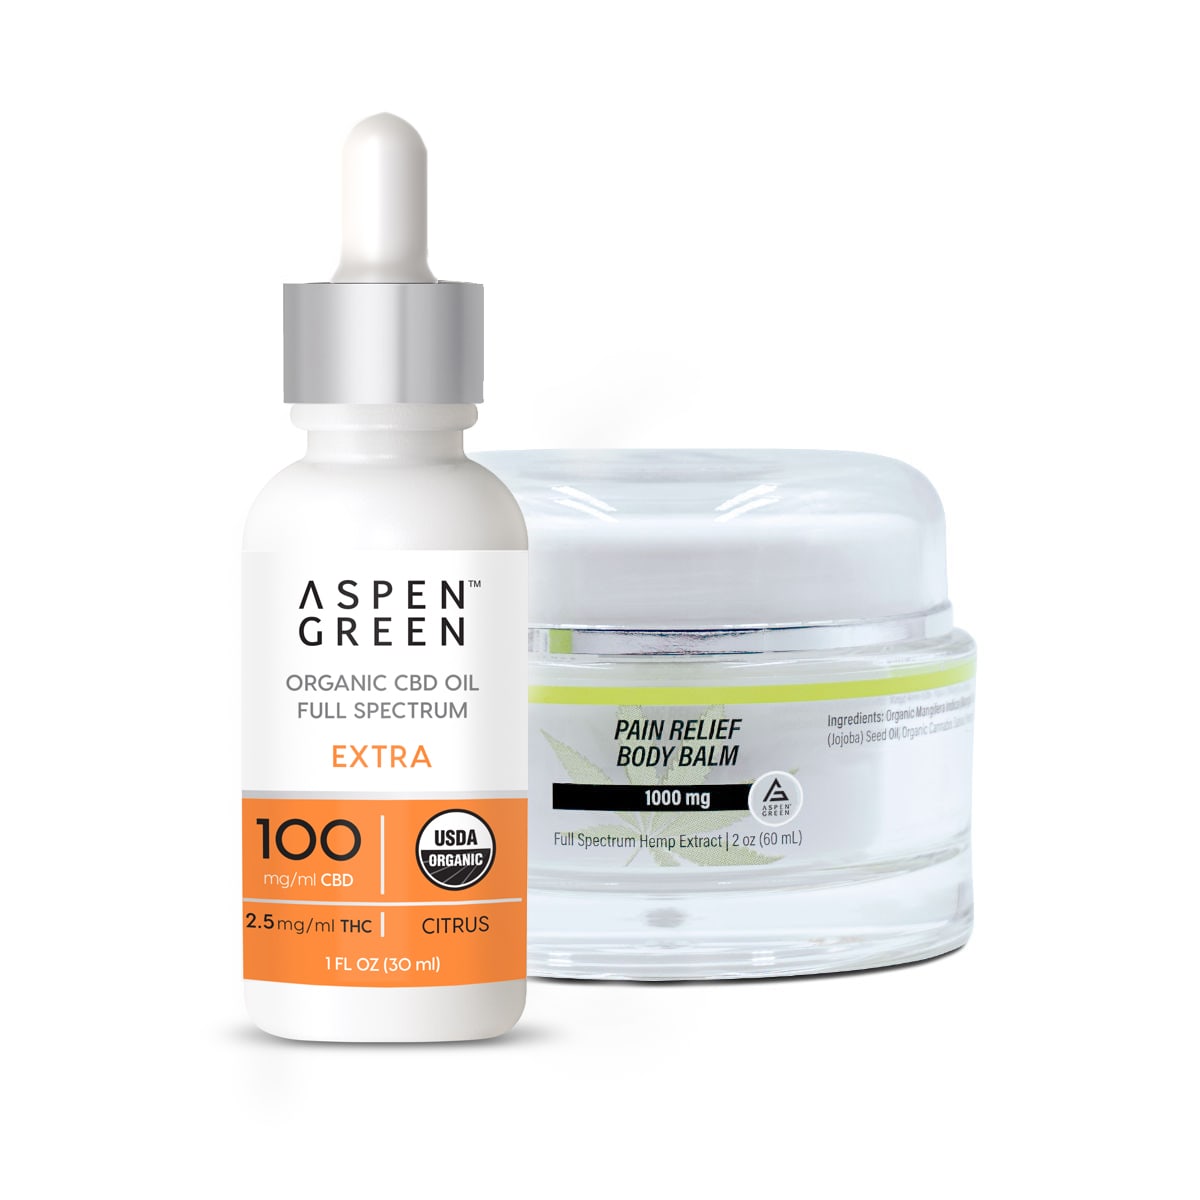 Aspen Green Extra CBD Oil and Pain Relief Body Balm grouping